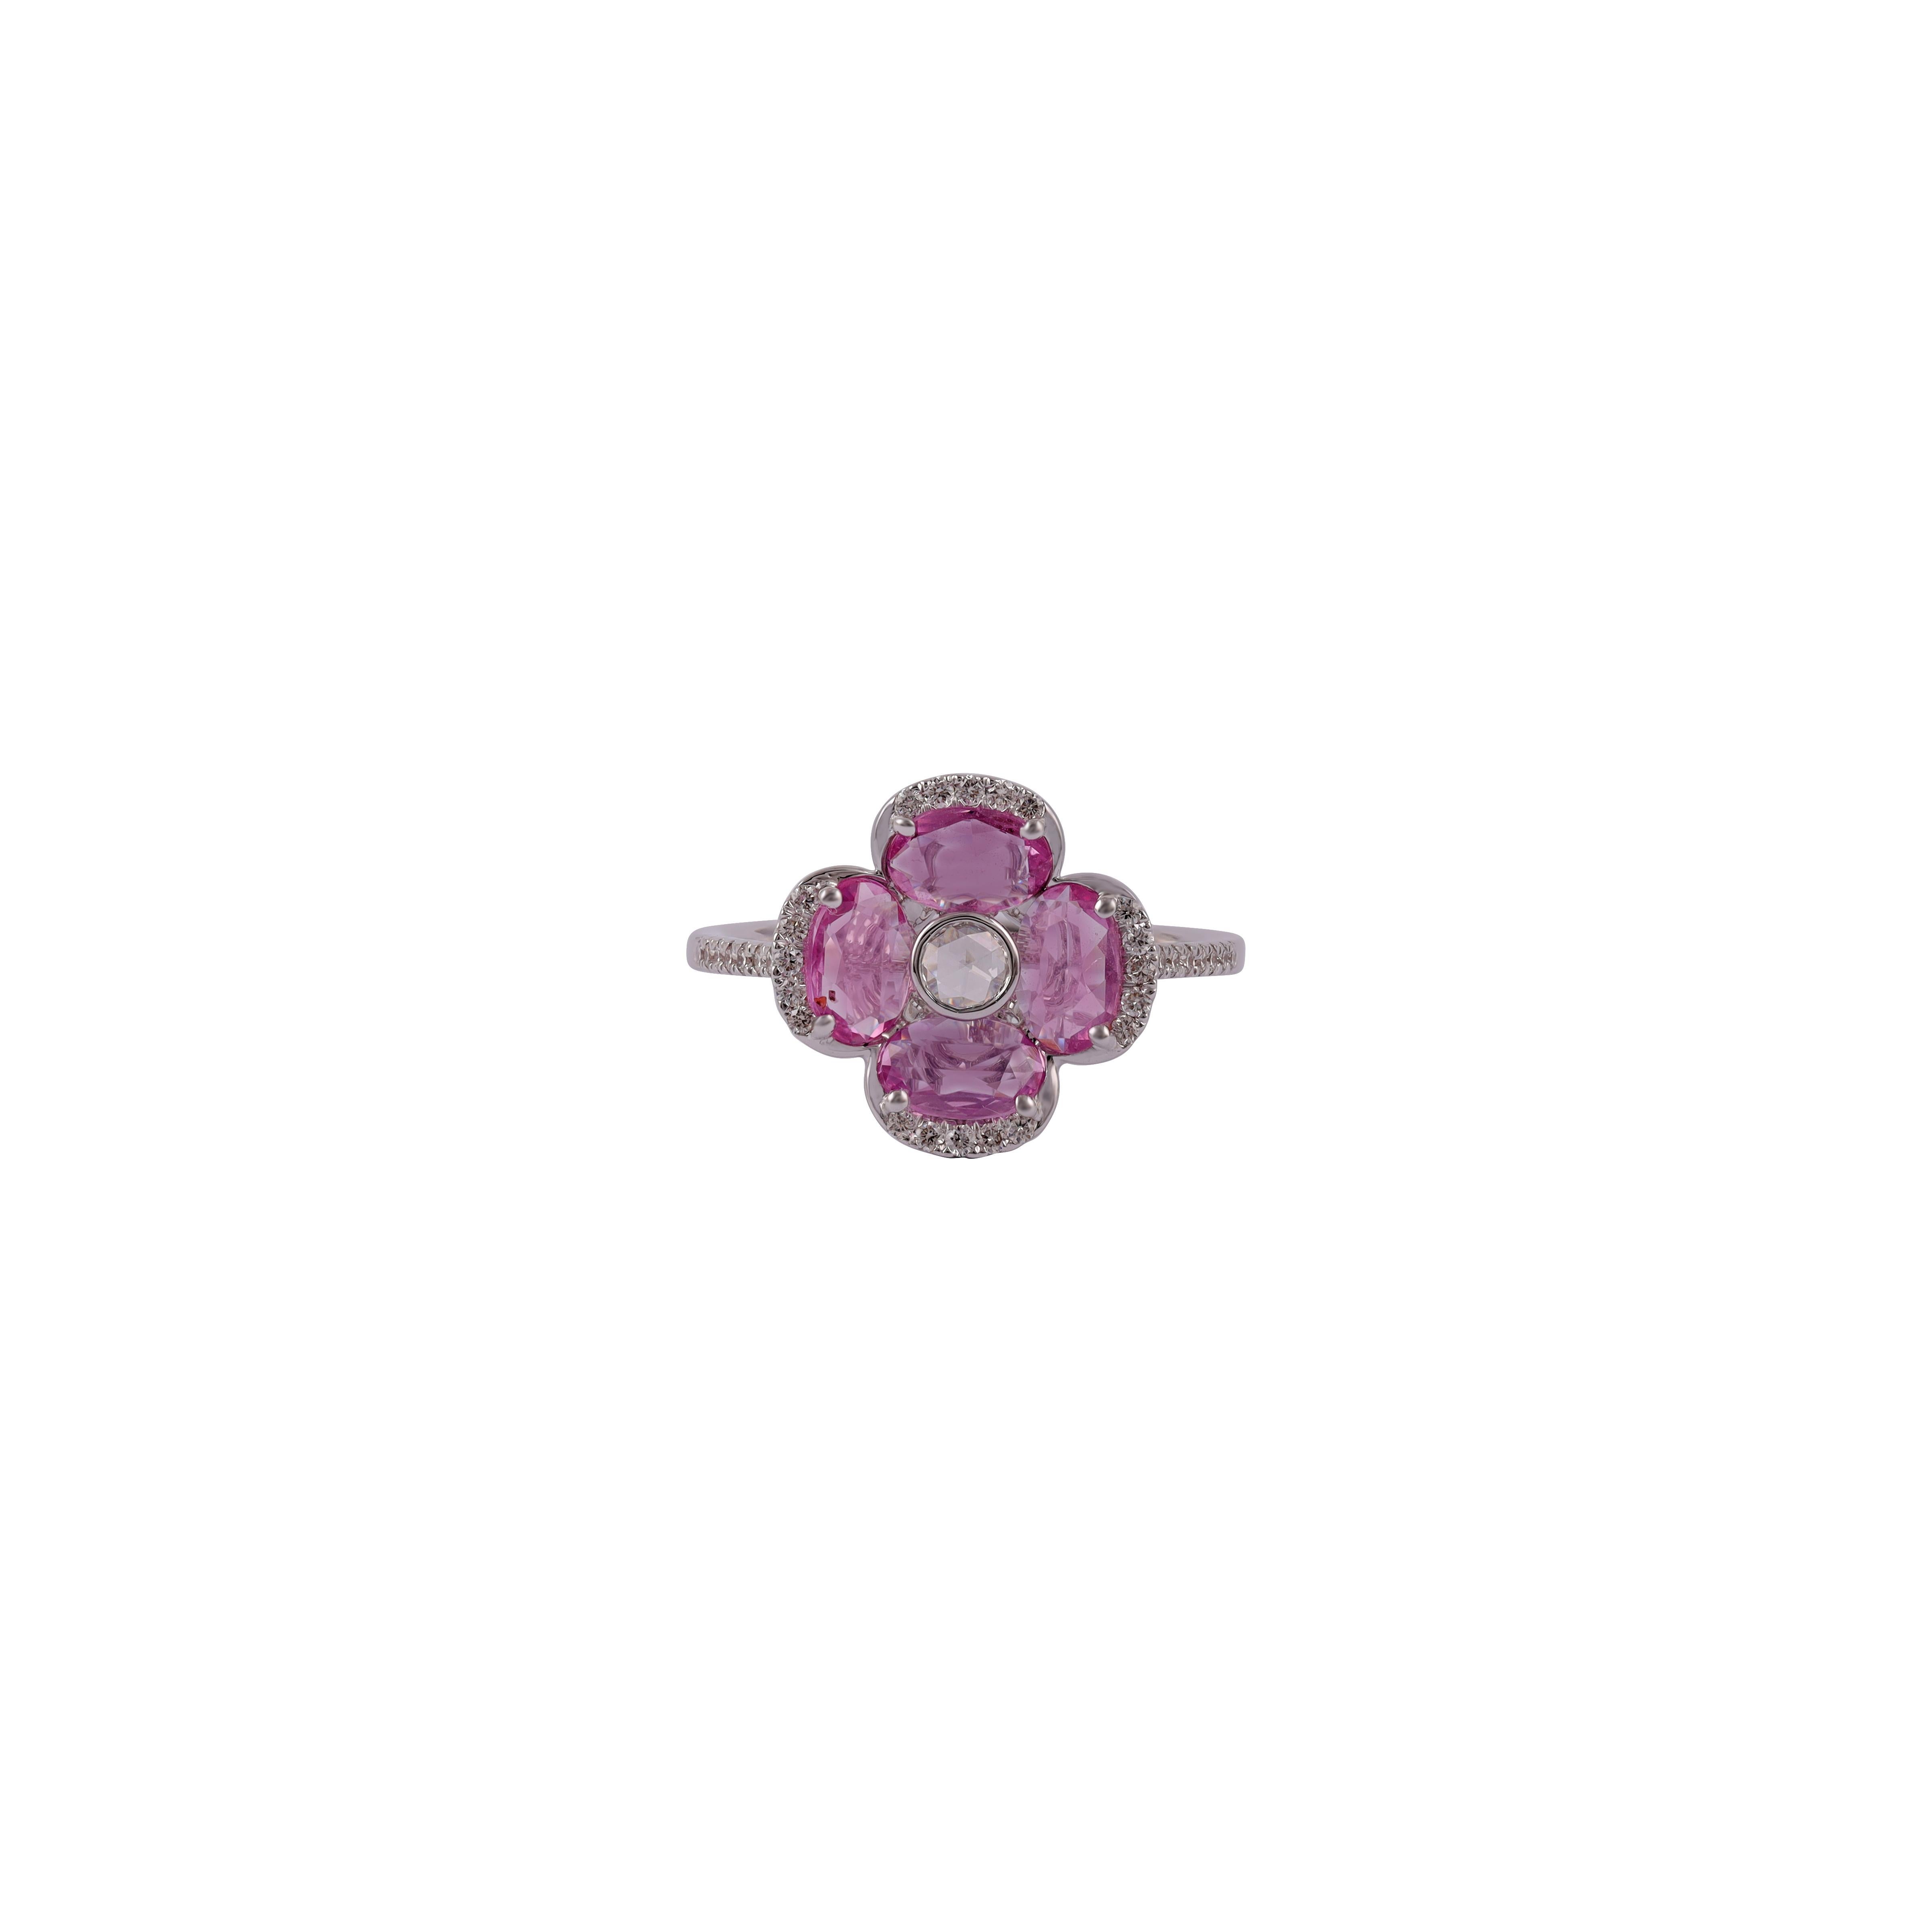 Rose cut Diamond surrounded by Oval Pink Sapphire Flower Ring
1 Rose cut  Diamond - 0.06 CTS
4 Oval Pink Sapphire - 1.34 CTS
36 Round Brilliant Cut 0.22 CTS
18k White Gold.

